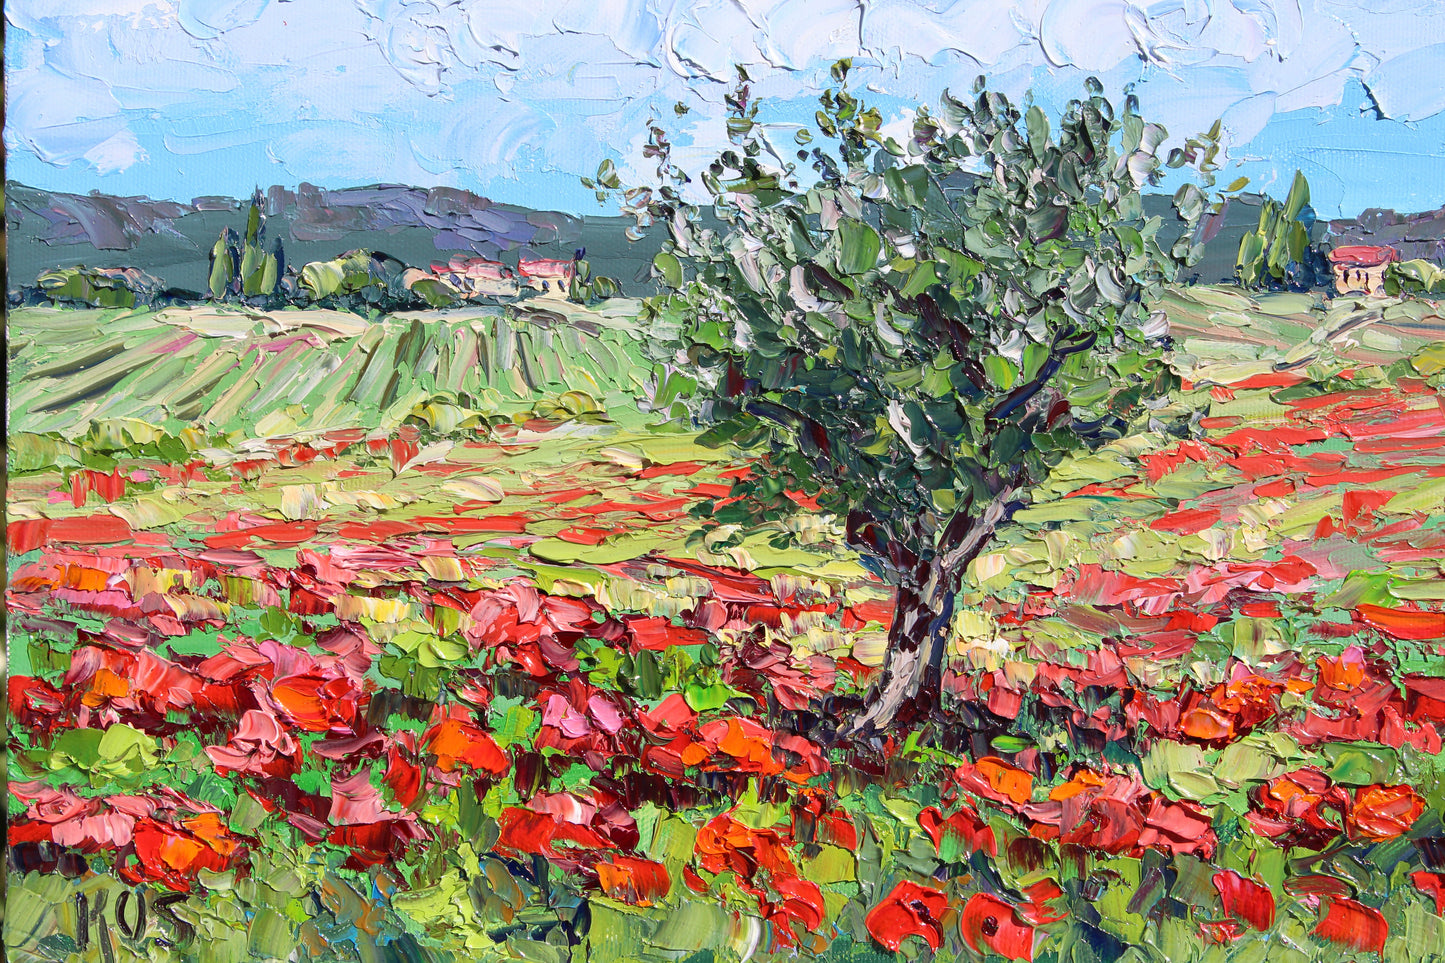 Dreaming Of Tuscany, Original 11" x 14" Italian Tuscan Landscape Oil Painting With Red Poppies And Olive Trees